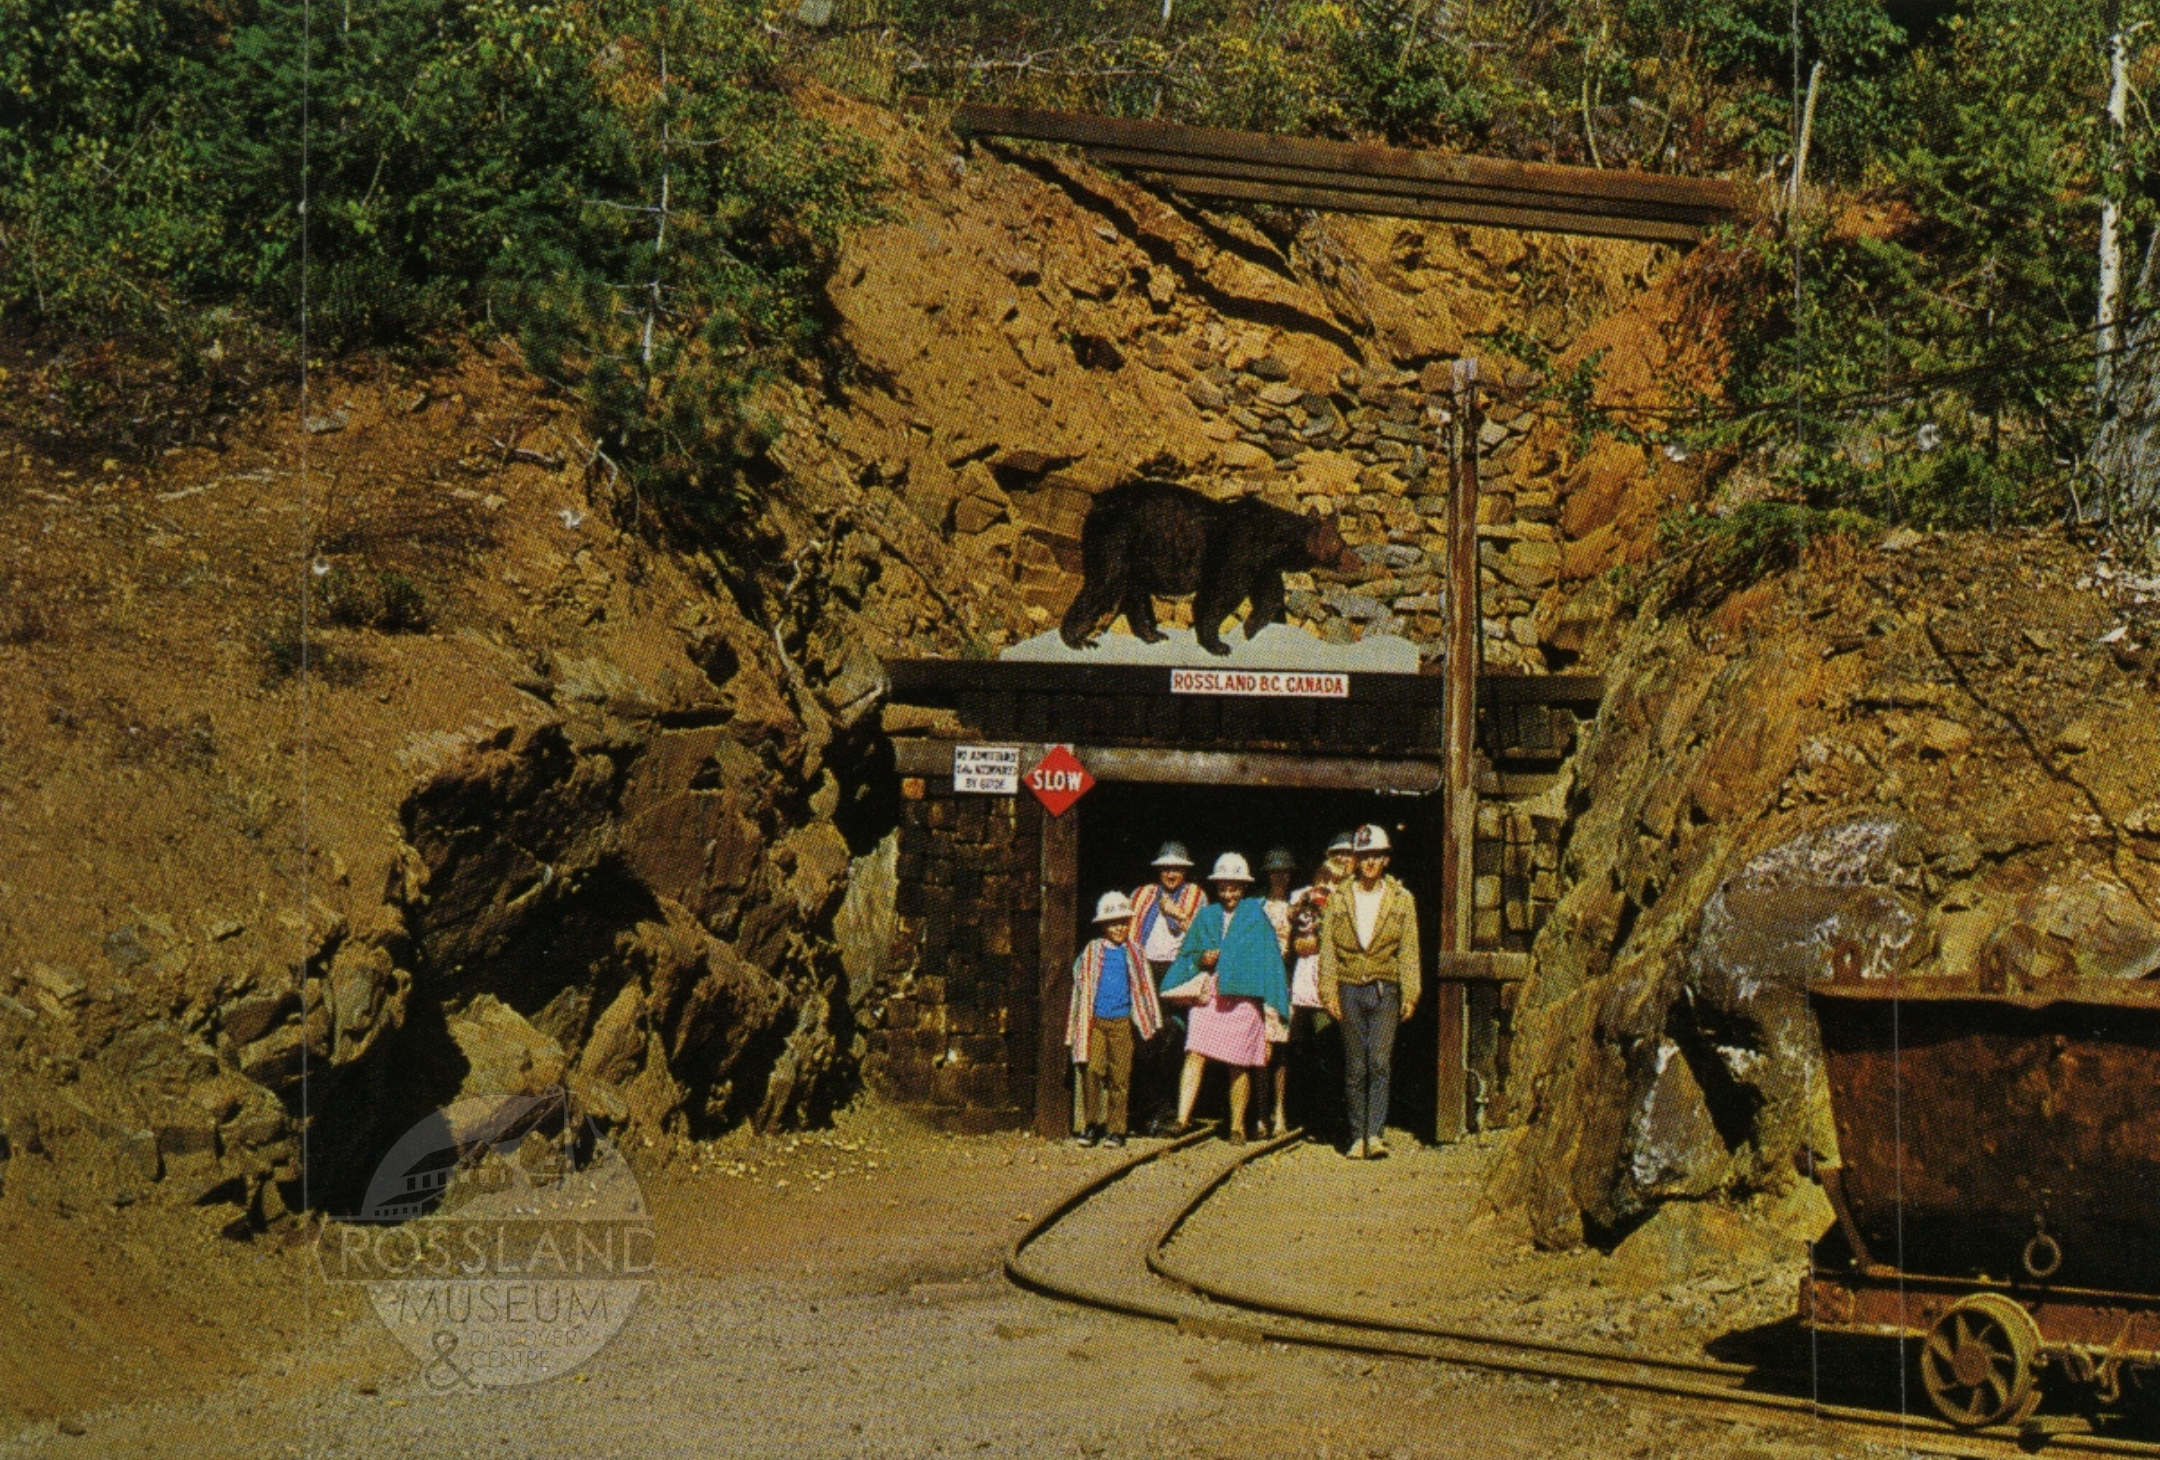 Photo 2276.0200: Tour group exiting the Black Bear Mine, date unknown